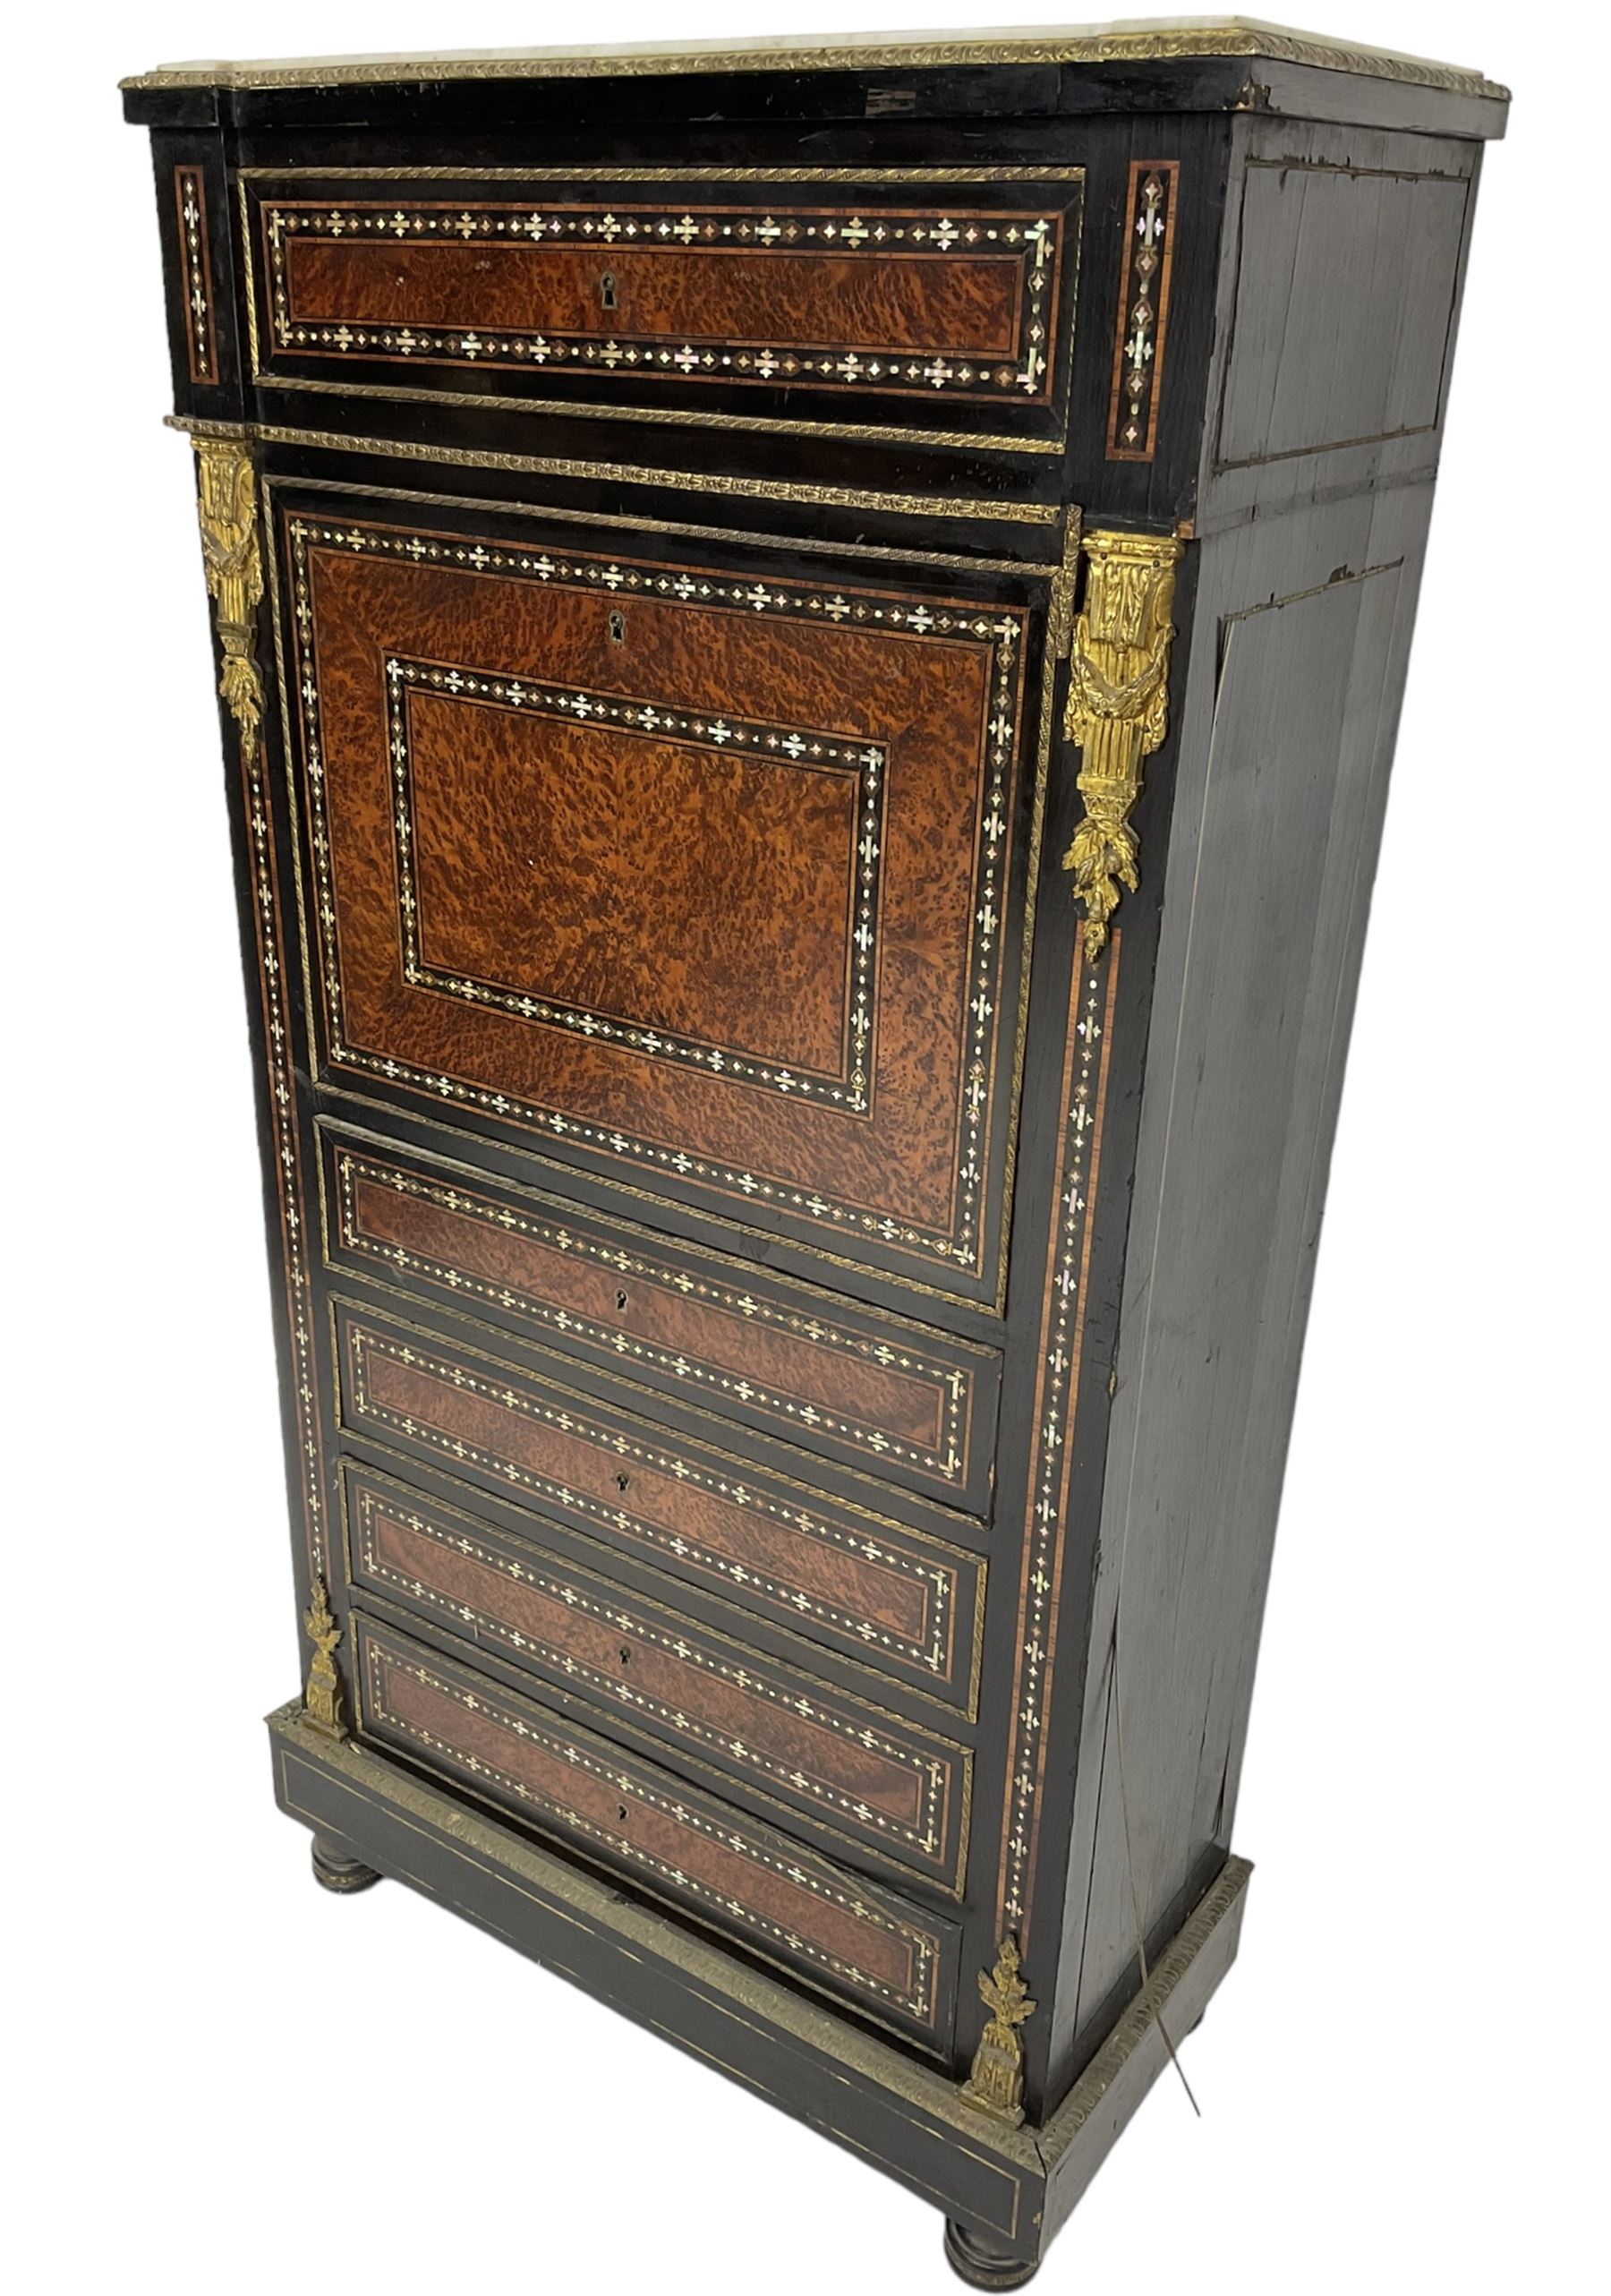 Late 19th century French ebonised and amboyna secrétaire à abattant - Image 3 of 8